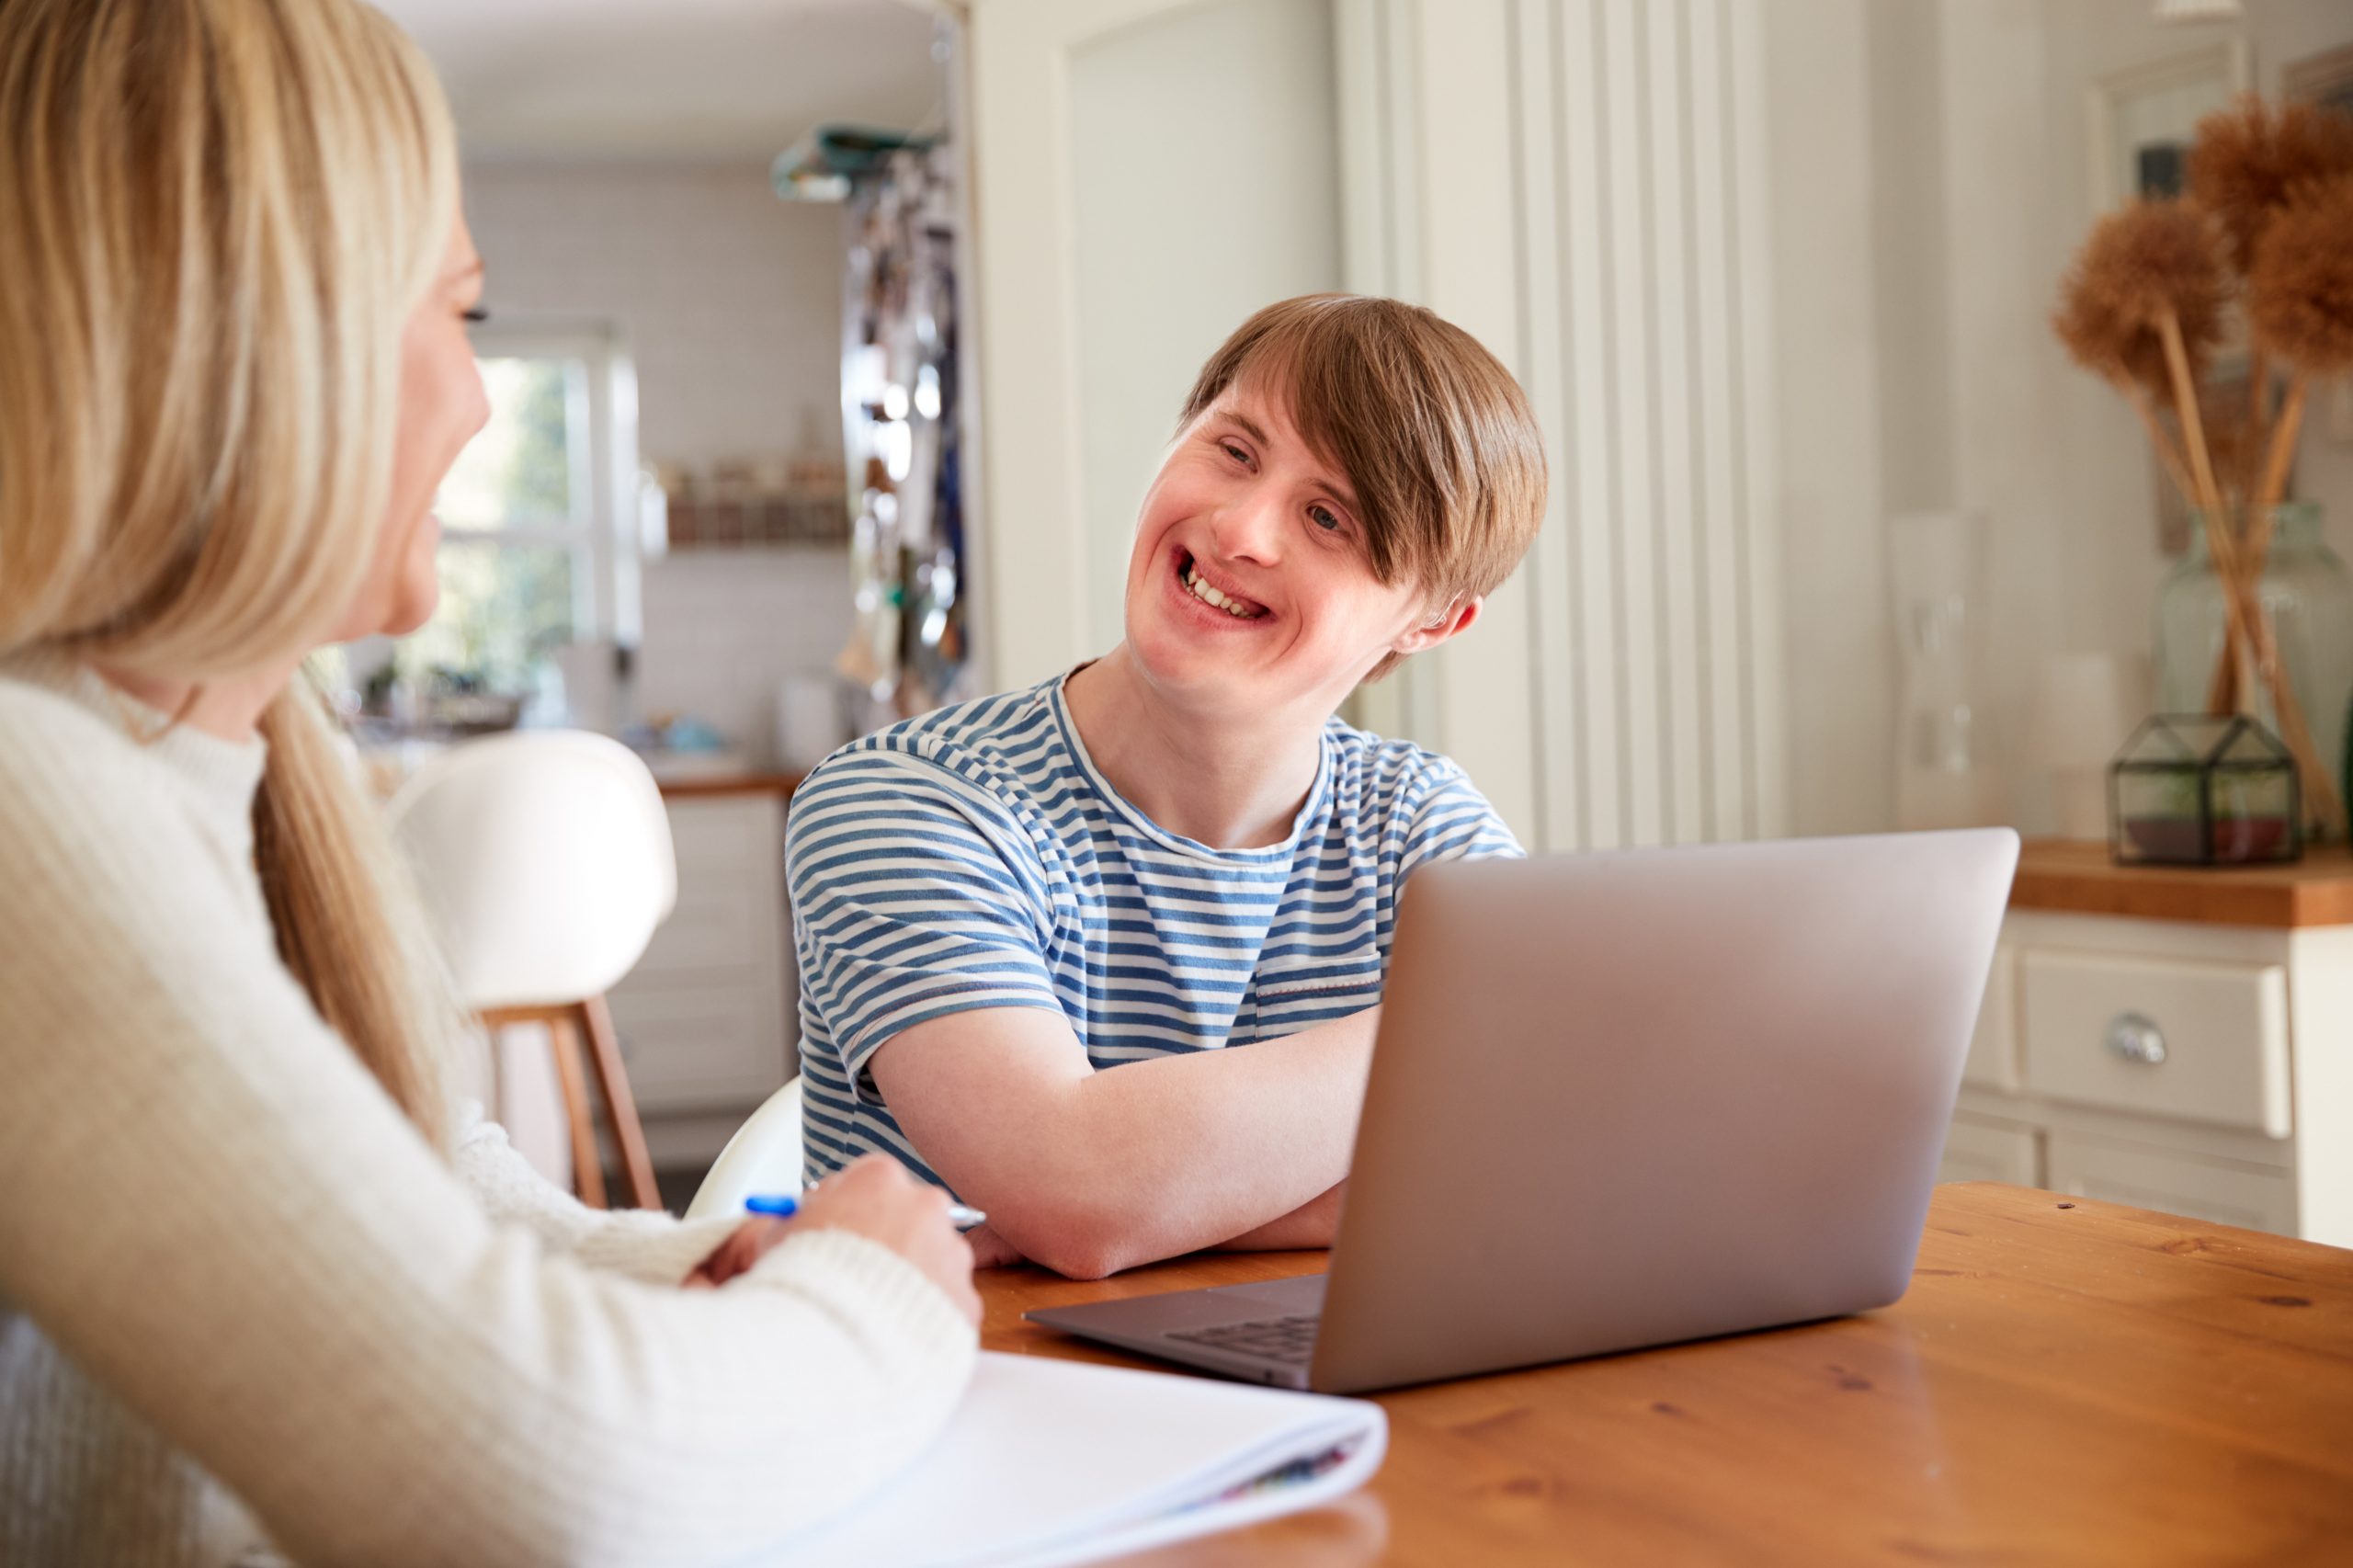 Man Who Has Downs Syndrome Sitting With Home Tutor Using Laptop For Lesson At Home